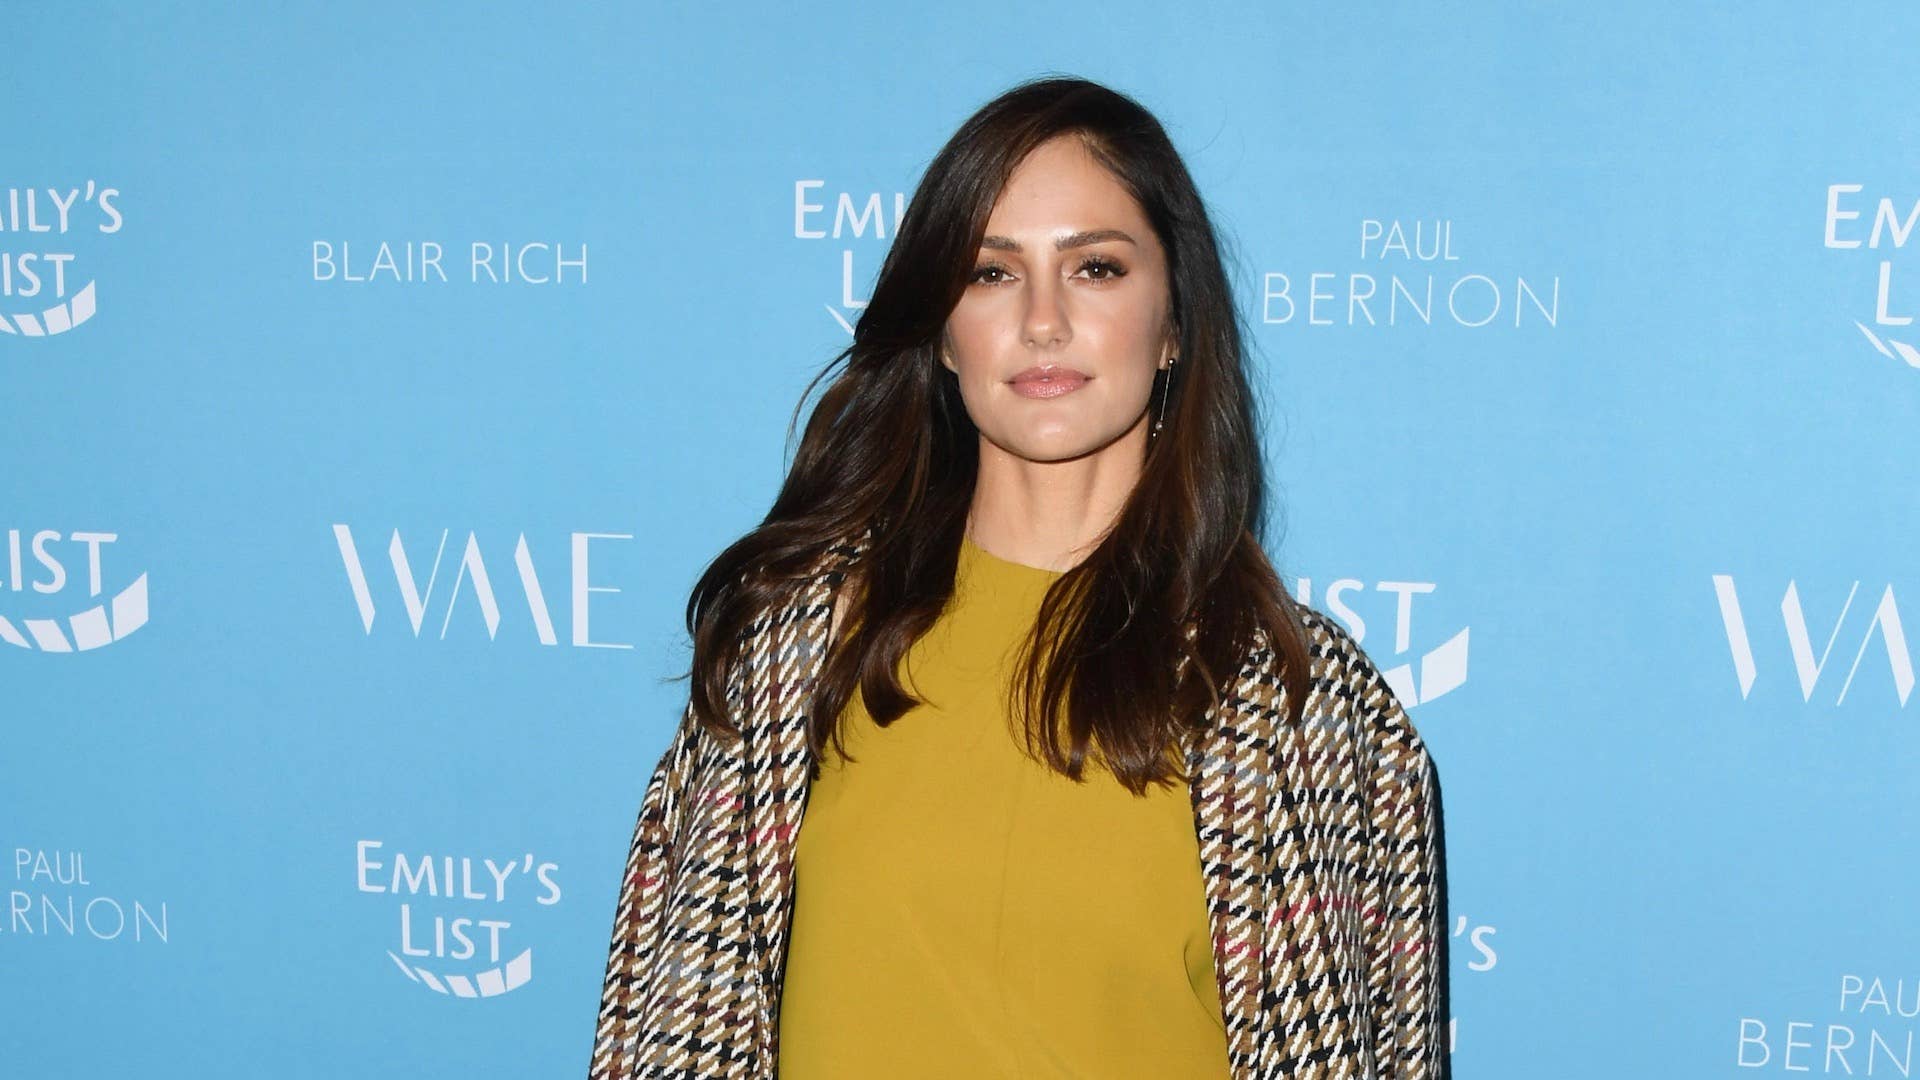 Minka Kelly attends EMILY's List 2nd Annual Pre-Oscars Event at Four Seasons